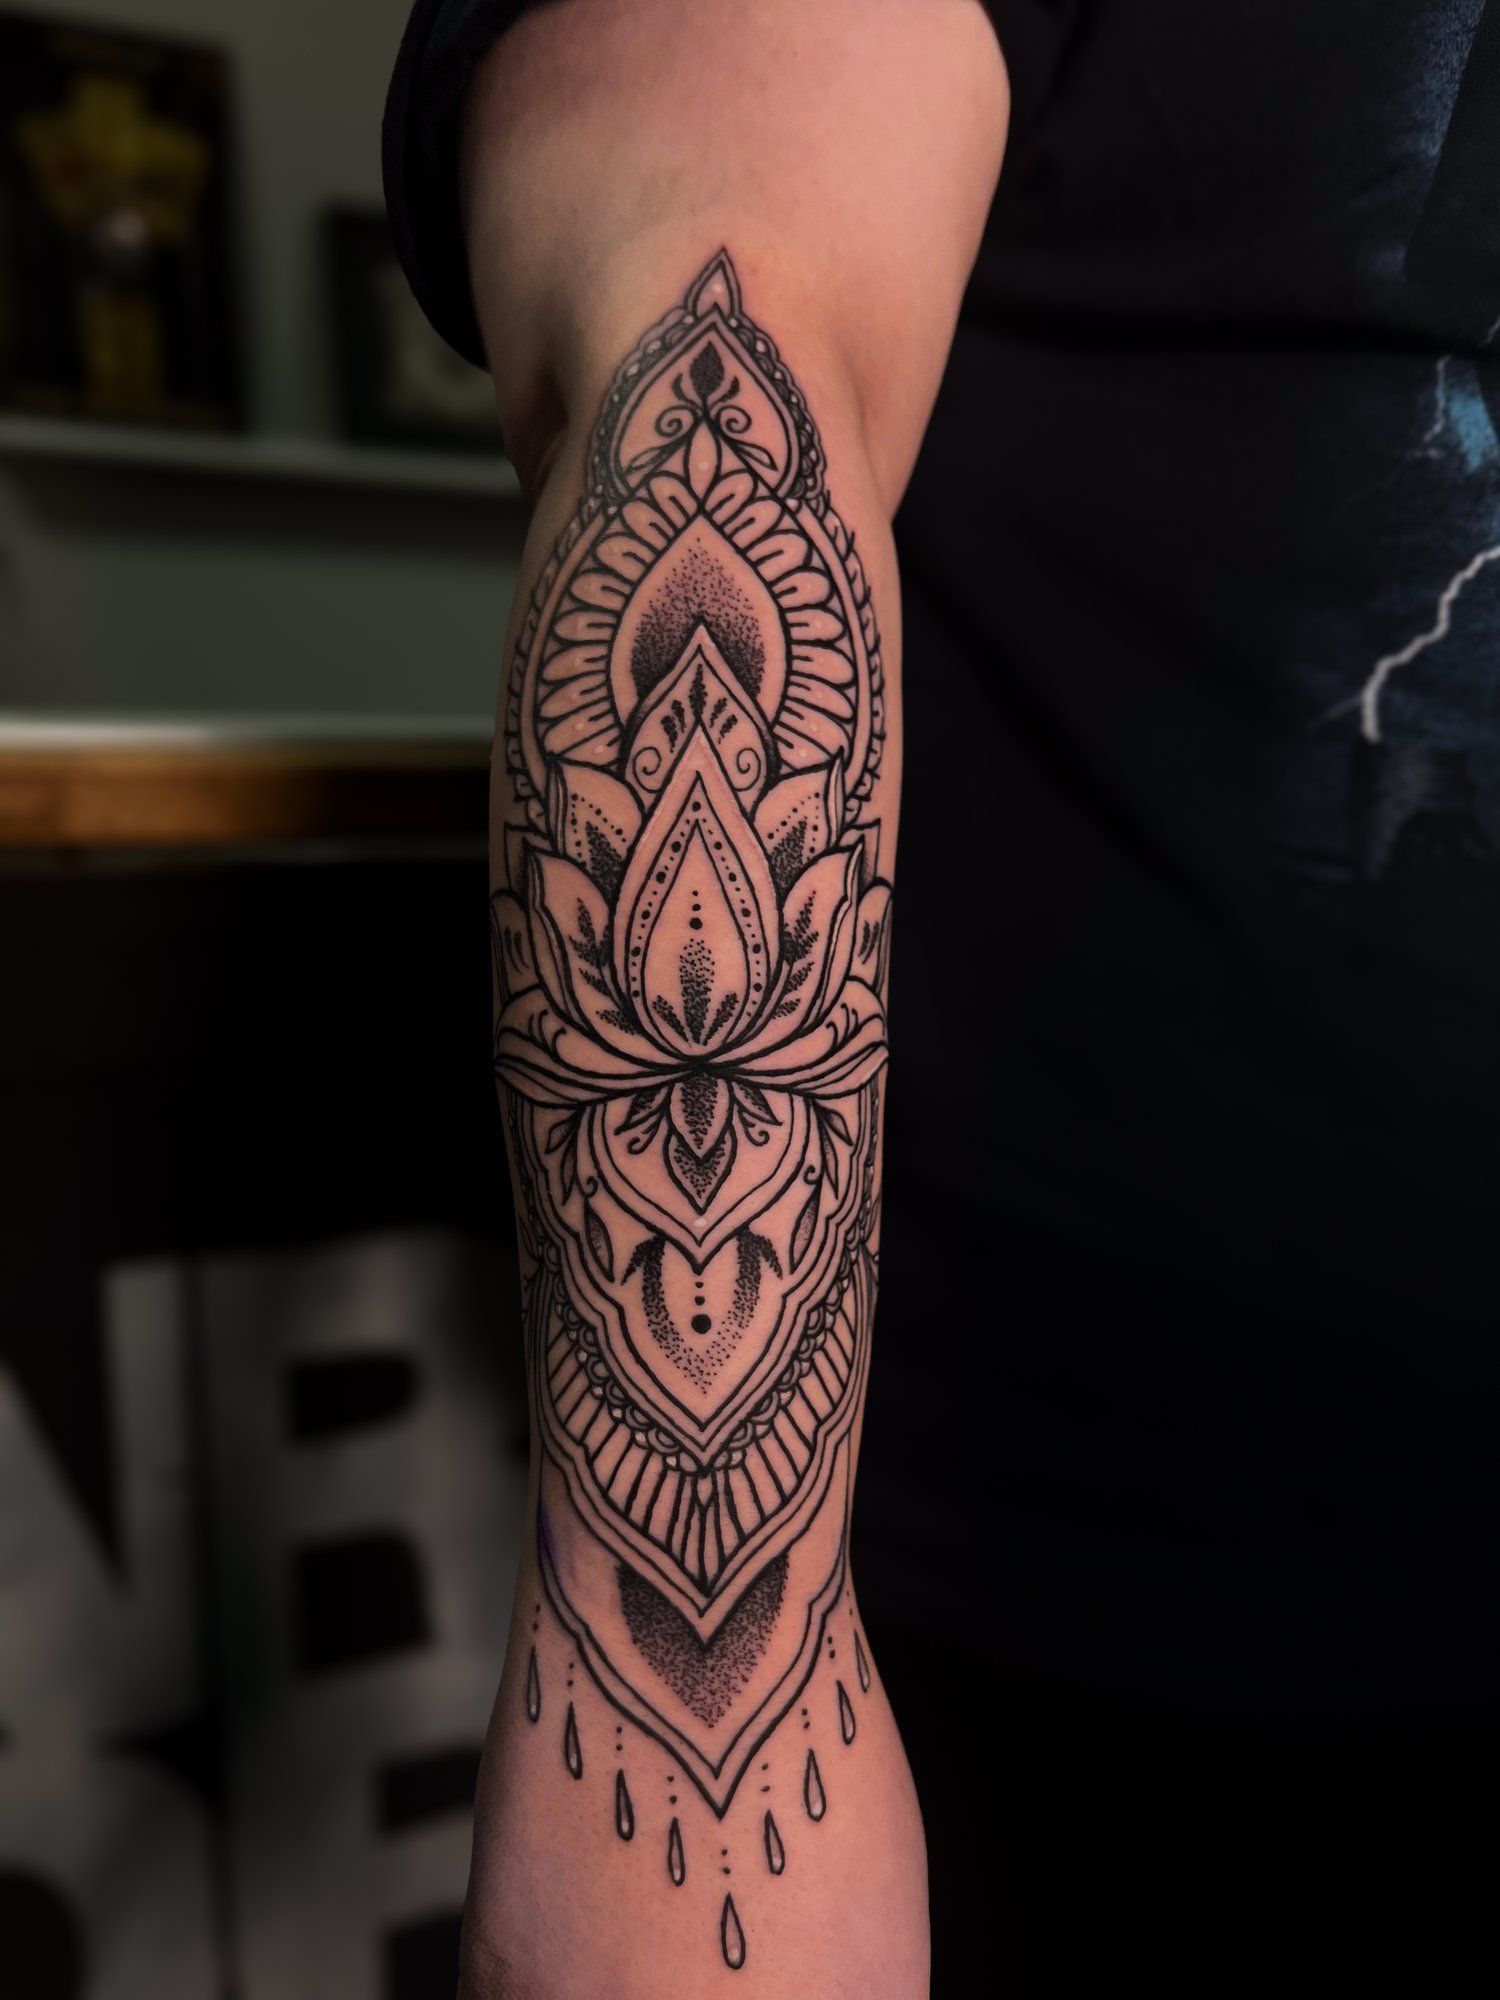 A close up of a tattoo on a person 's arm.